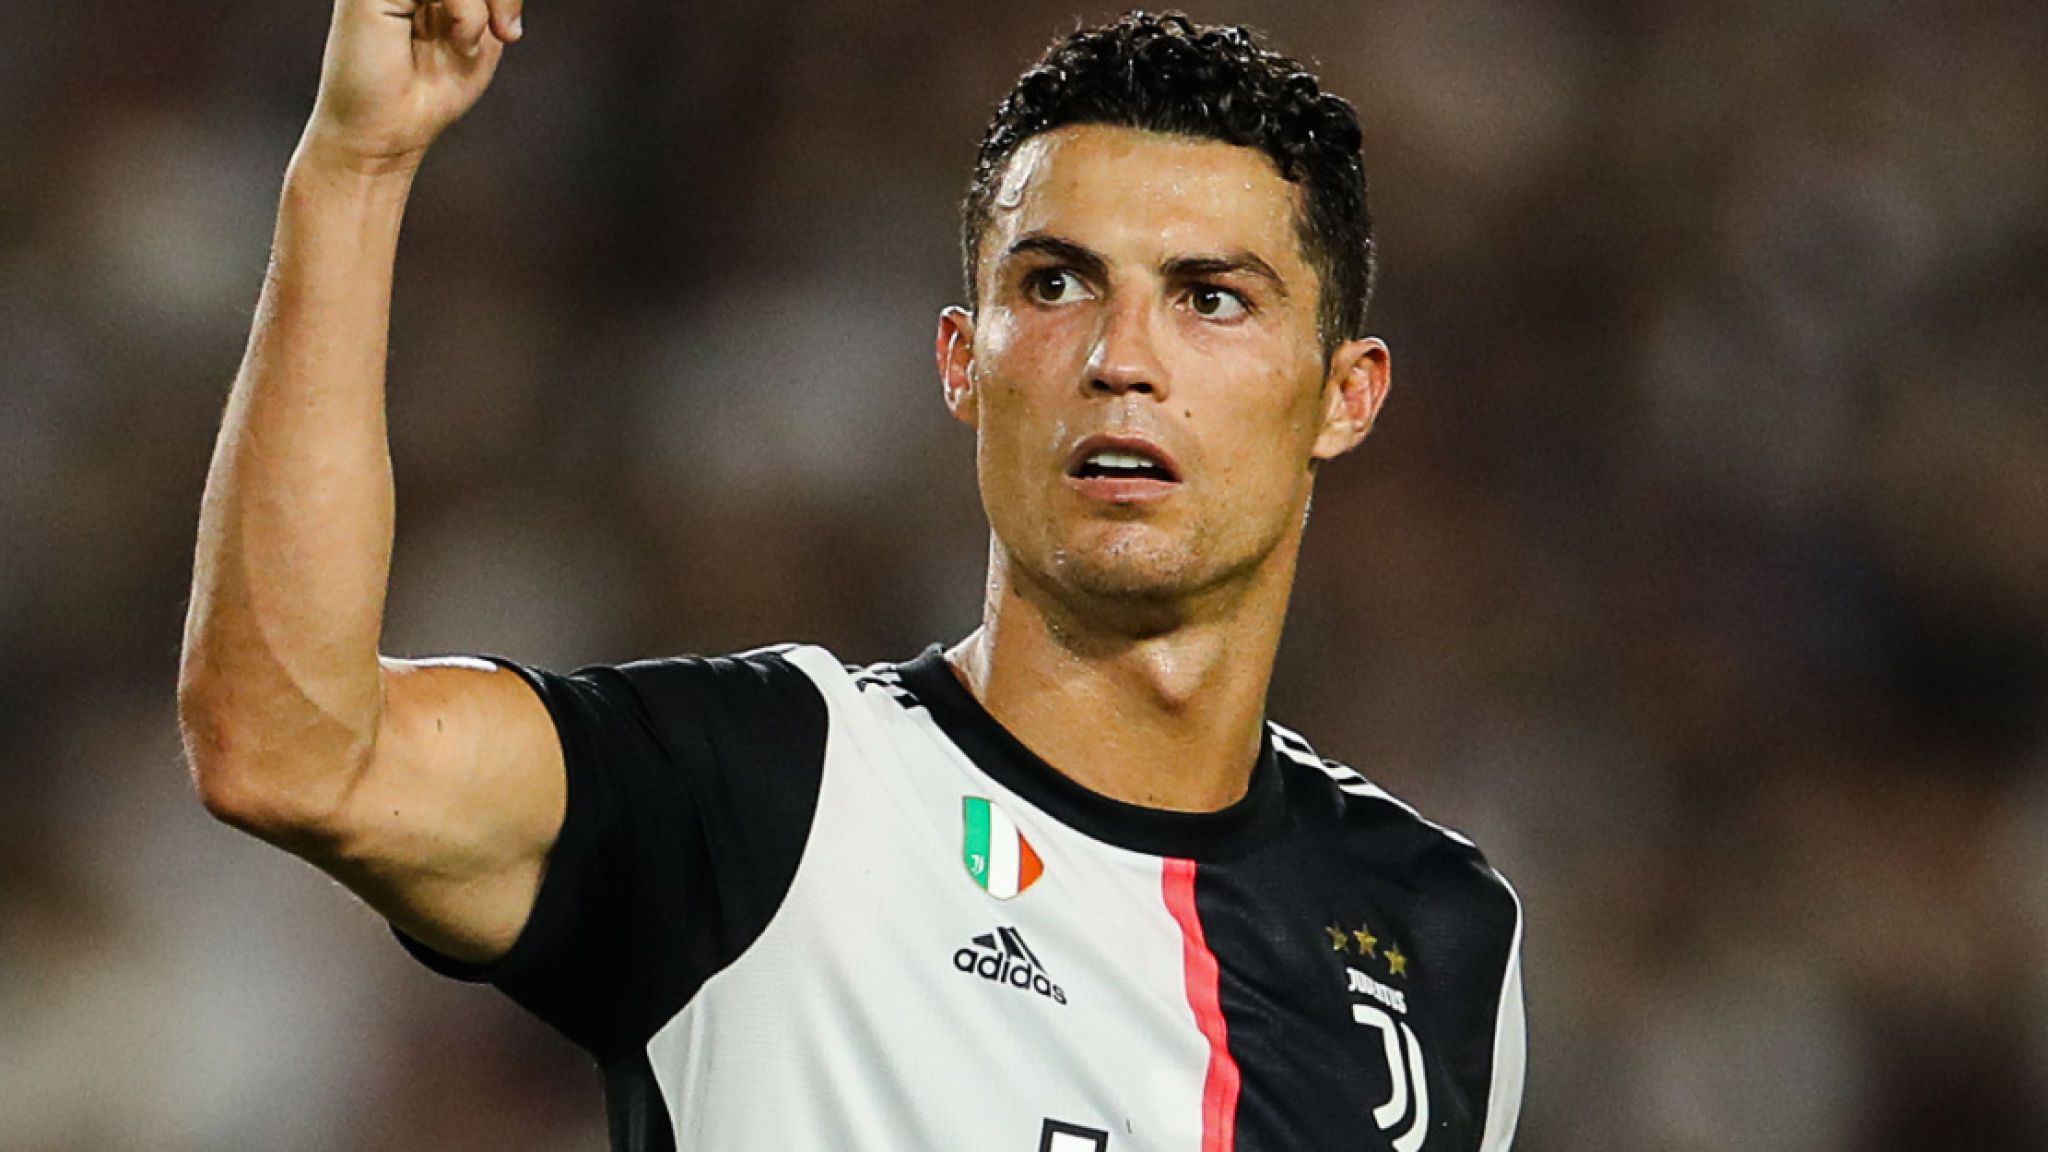 Woman Claims To Be A McDonald’s Employee Who Gave Burger To Cristiano Ronaldo As A Starving Kid